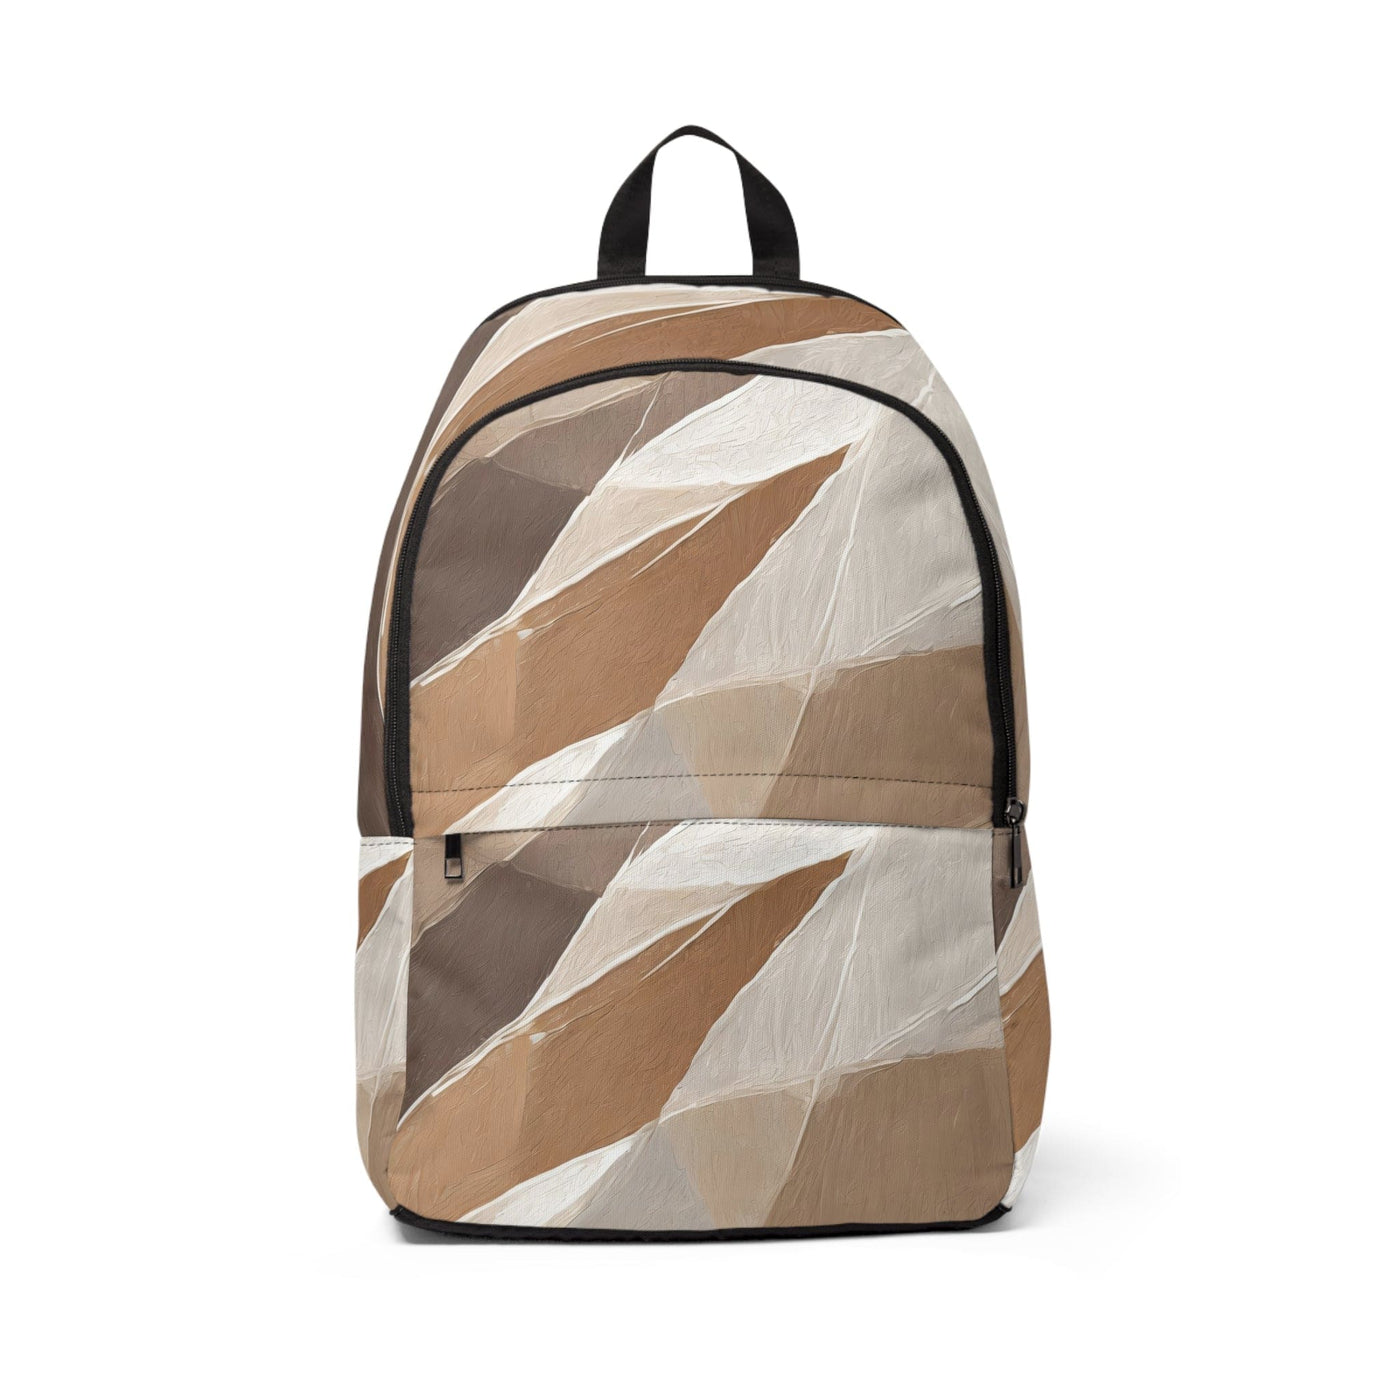 Fashion Backpack Waterproof Abstract Taupe Brown Textured Pattern 93796 - Bags